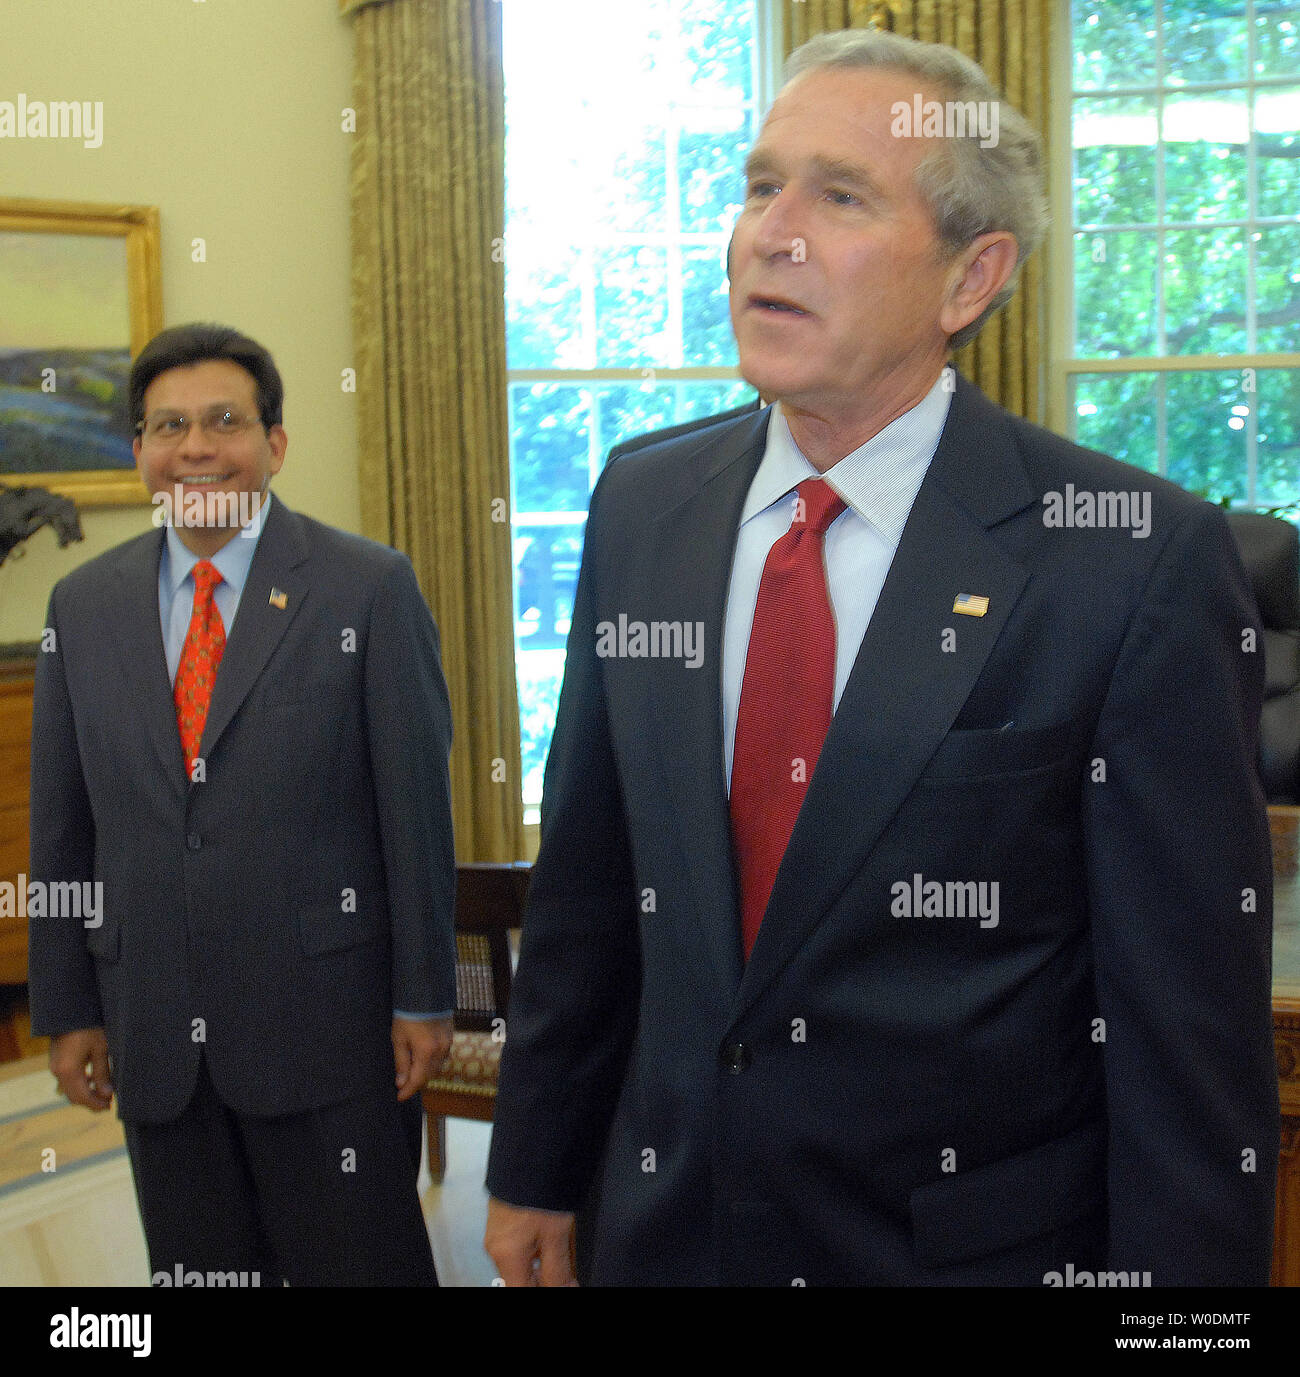 U.S. President George W. Bush (R) and Attorney General Alberto Gonzales met in the Oval Office of the White House to discuss the 'Report to the President on Issues Raised by the Virginia Tech Tragedy' in Washington on June 13, 2007.   (UPI Photo/Roger L. Wollenberg) Stock Photo